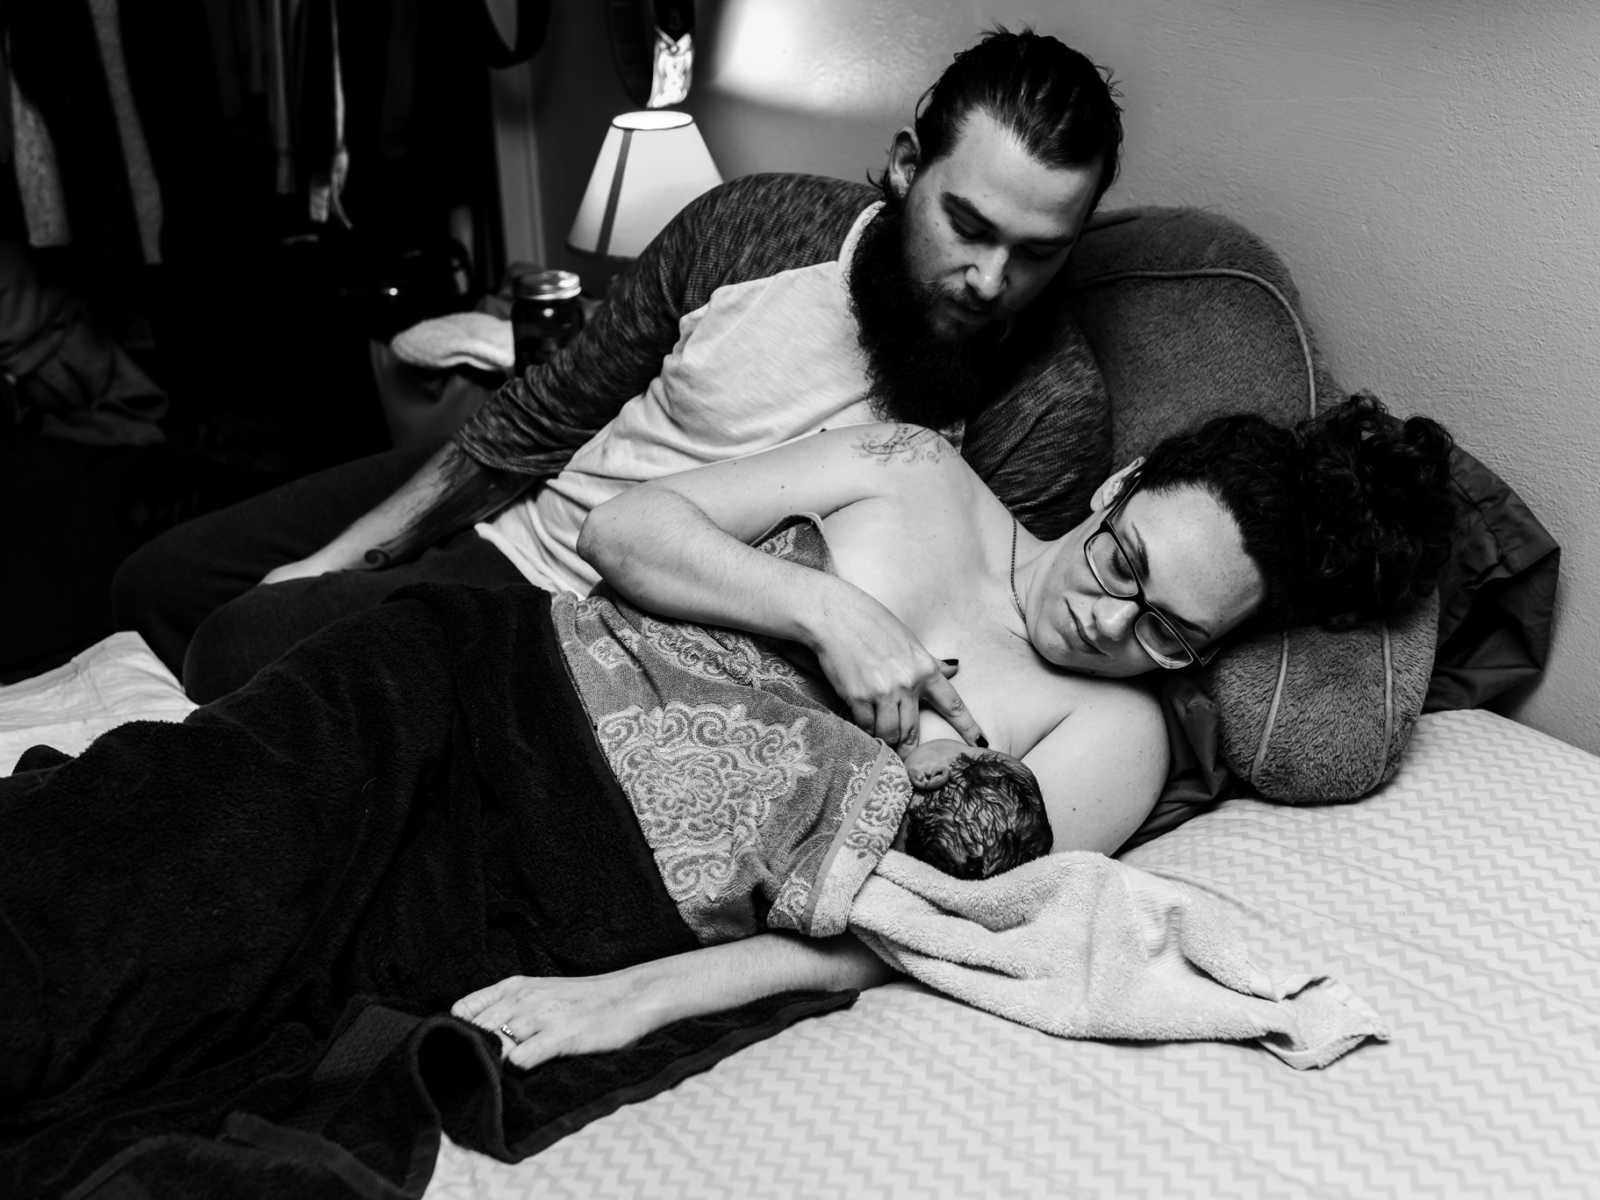 Mother in father of 11 pound newborn baby lie in bed holding the baby